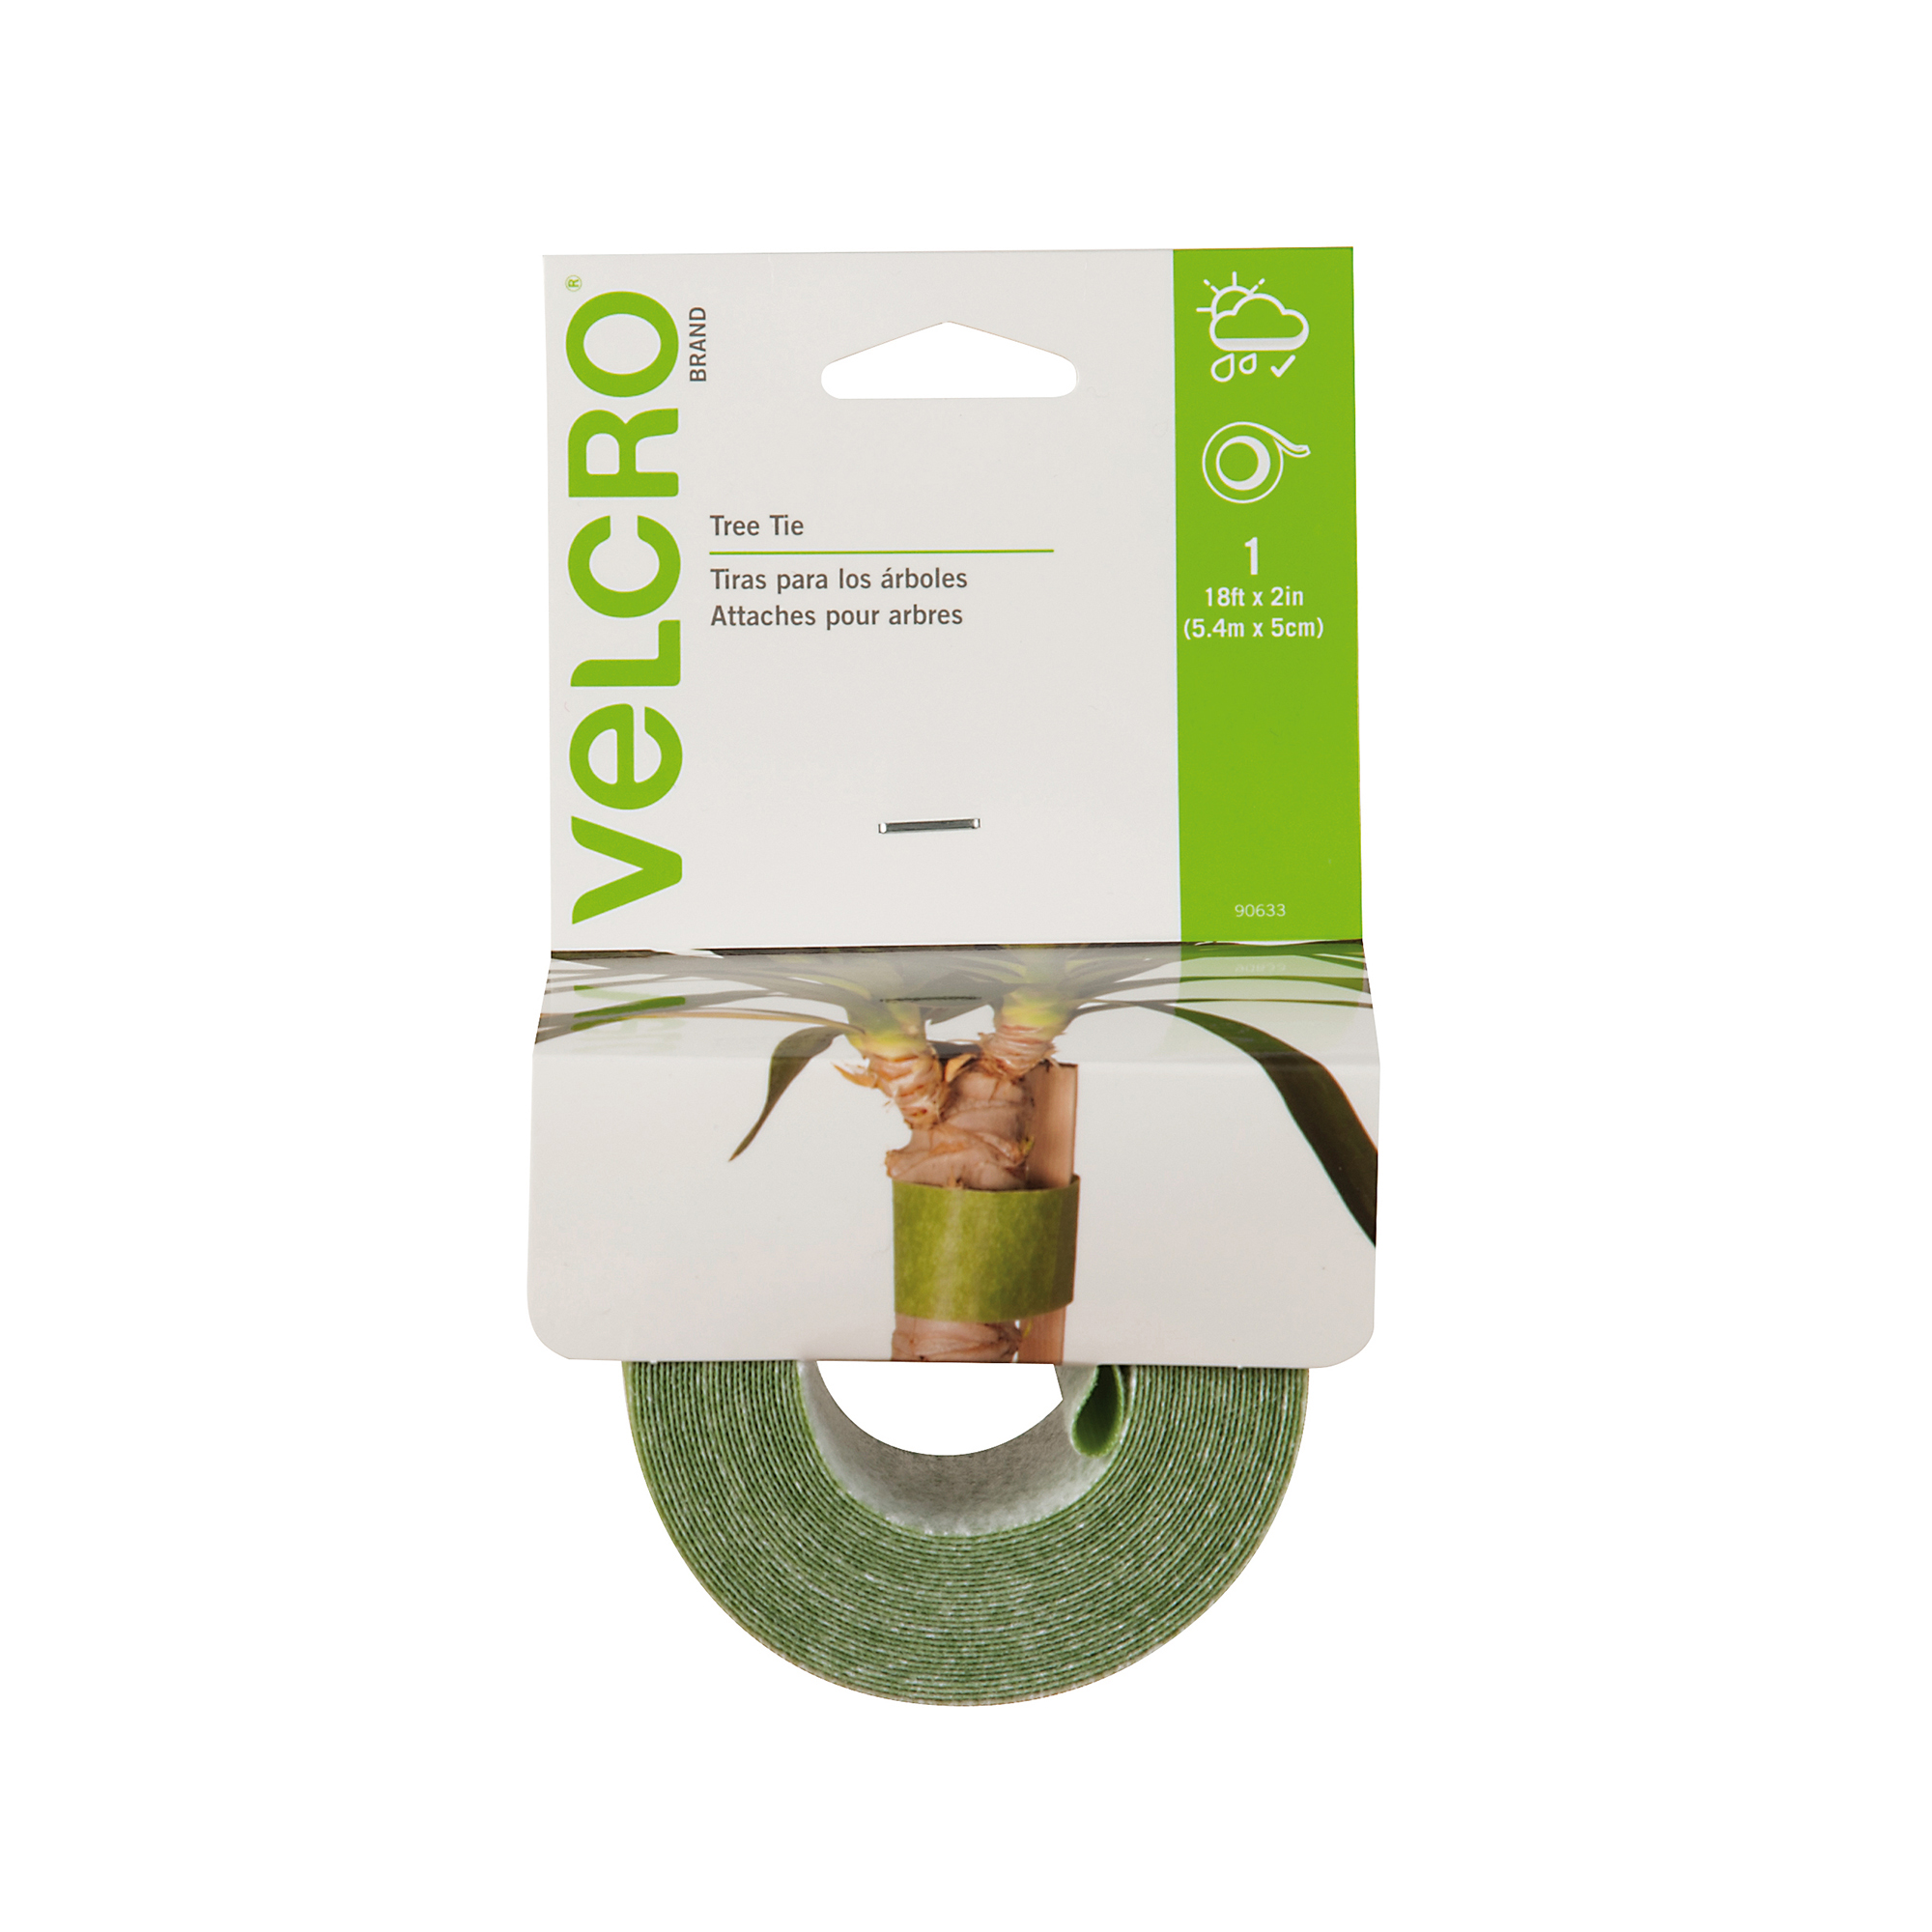  VELCRO Brand VEL-30071-USA ONE-WRAP Garden Ties, Plant  Supports for Effective Growing, Strong Grips are Reusable and Adjustable